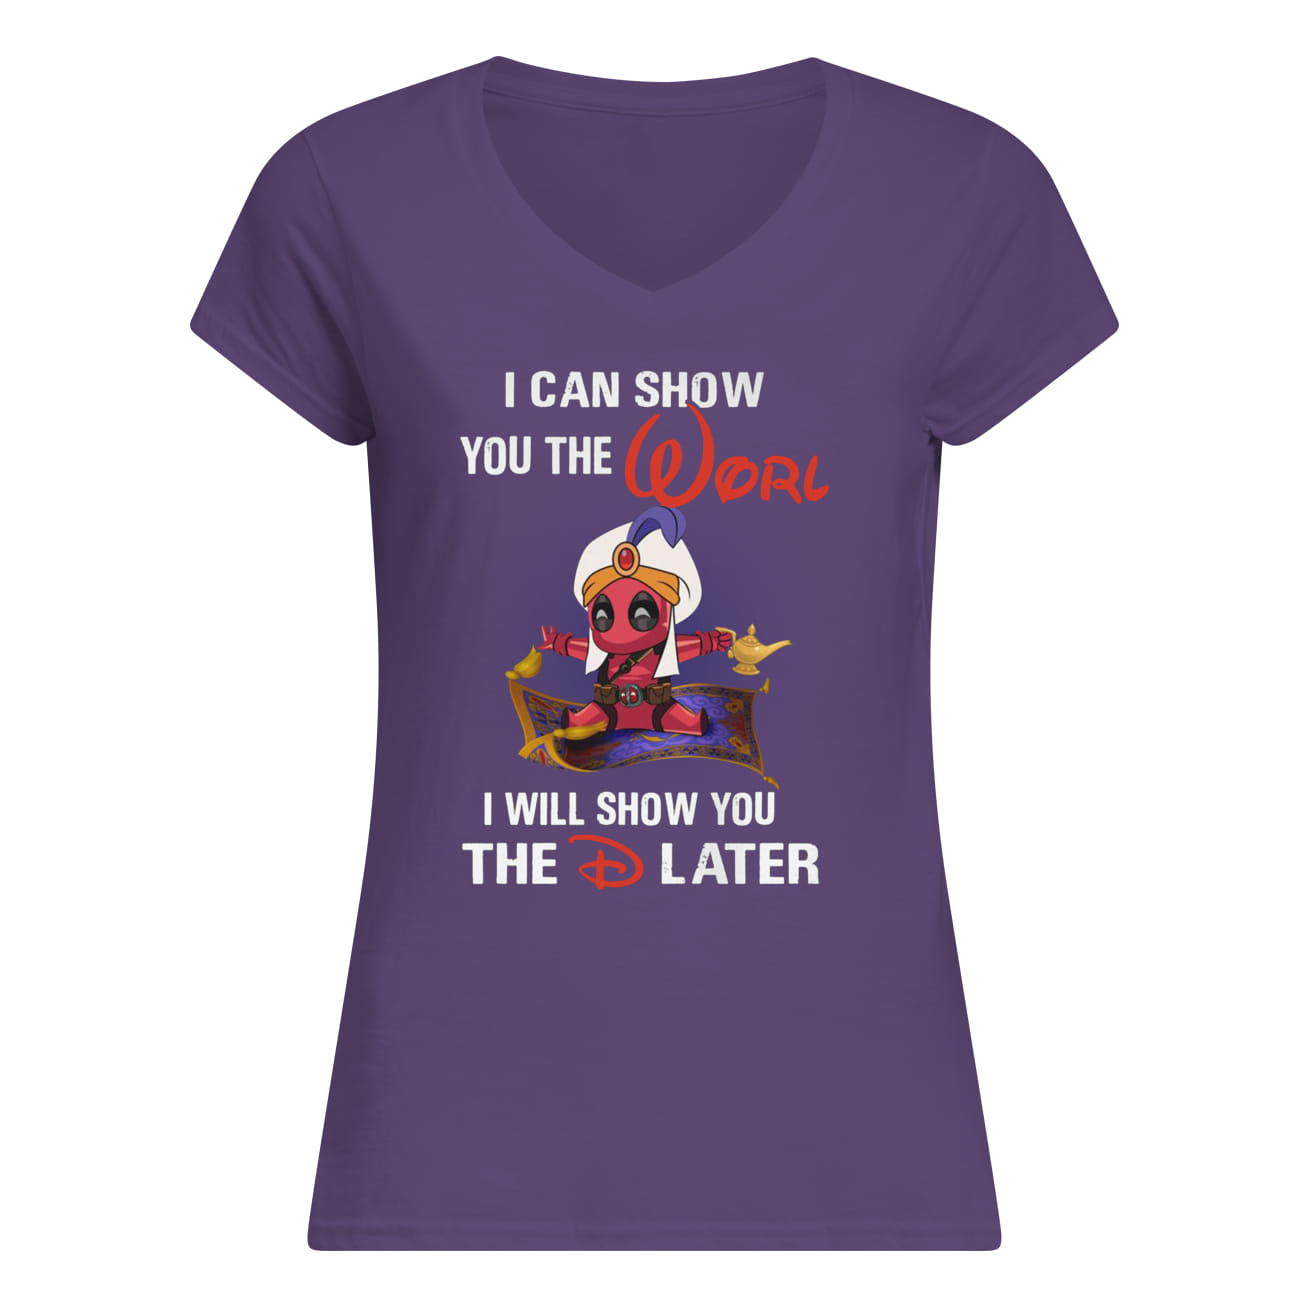 Deadpool aladdin I can show you the worl I will show you the D later lady v-neck